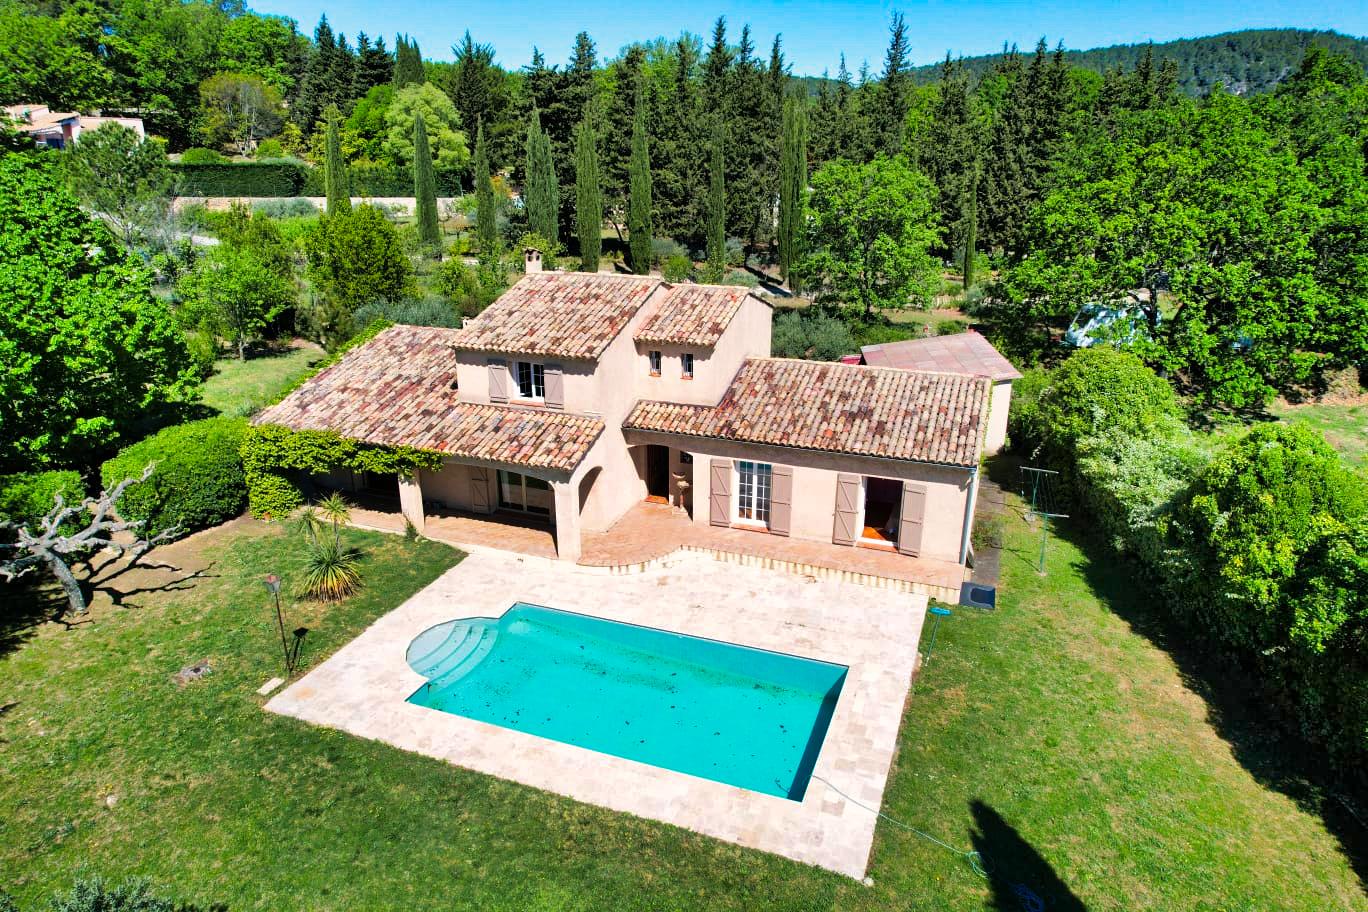 Charming villa, 215 m2, 4 bedrooms, 1 office, 3 shower rooms, workshop, pool, plot of 3049m2 in Uc z